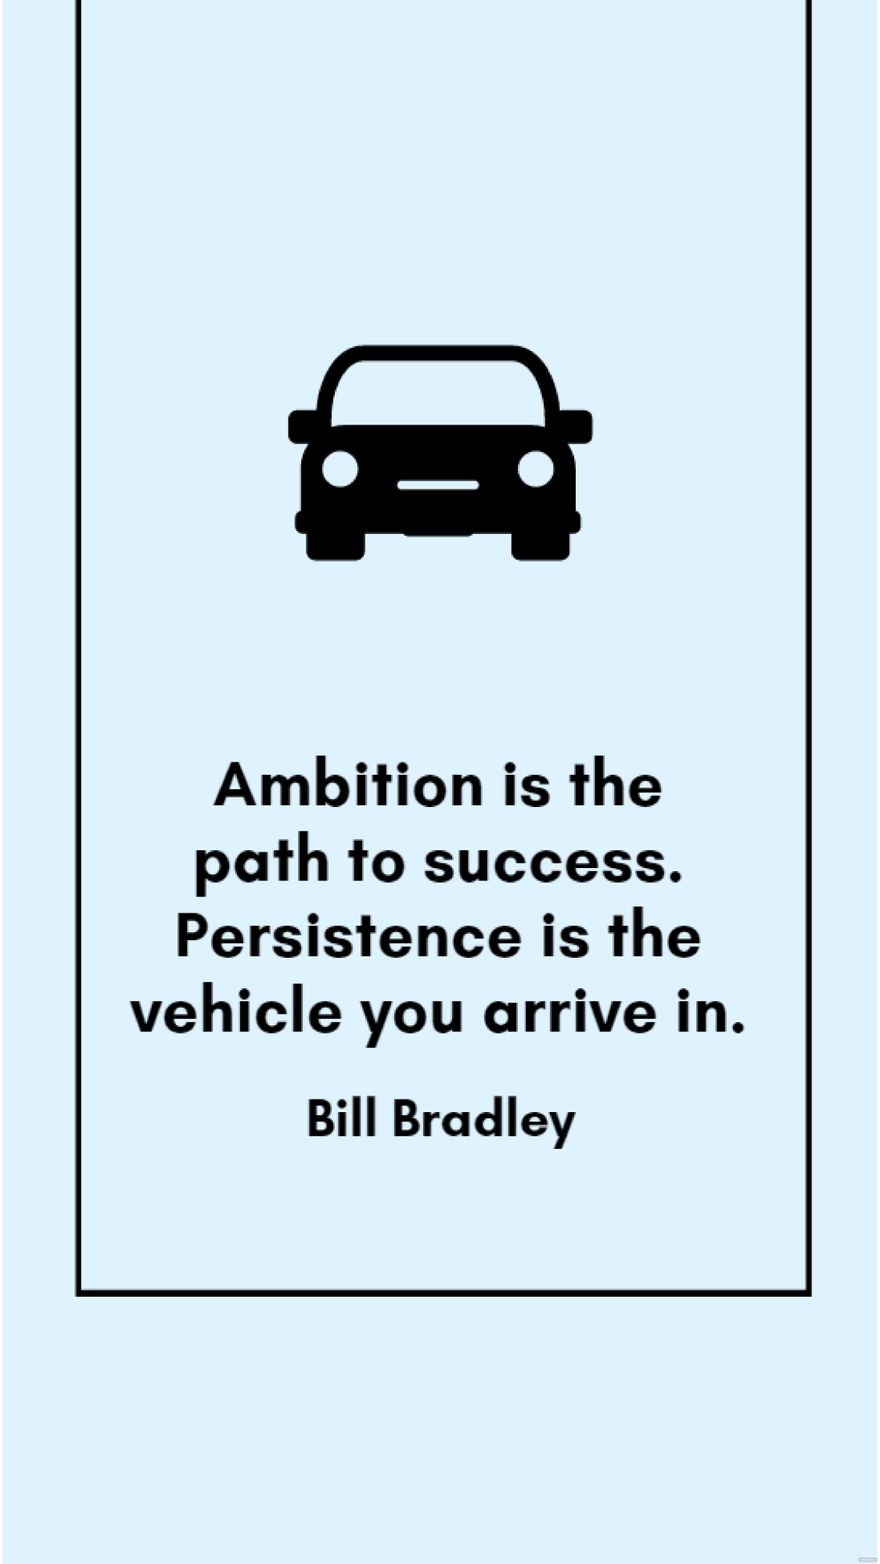 Free Bill Bradley - Ambition is the path to success. Persistence is the vehicle you arrive in. in JPG